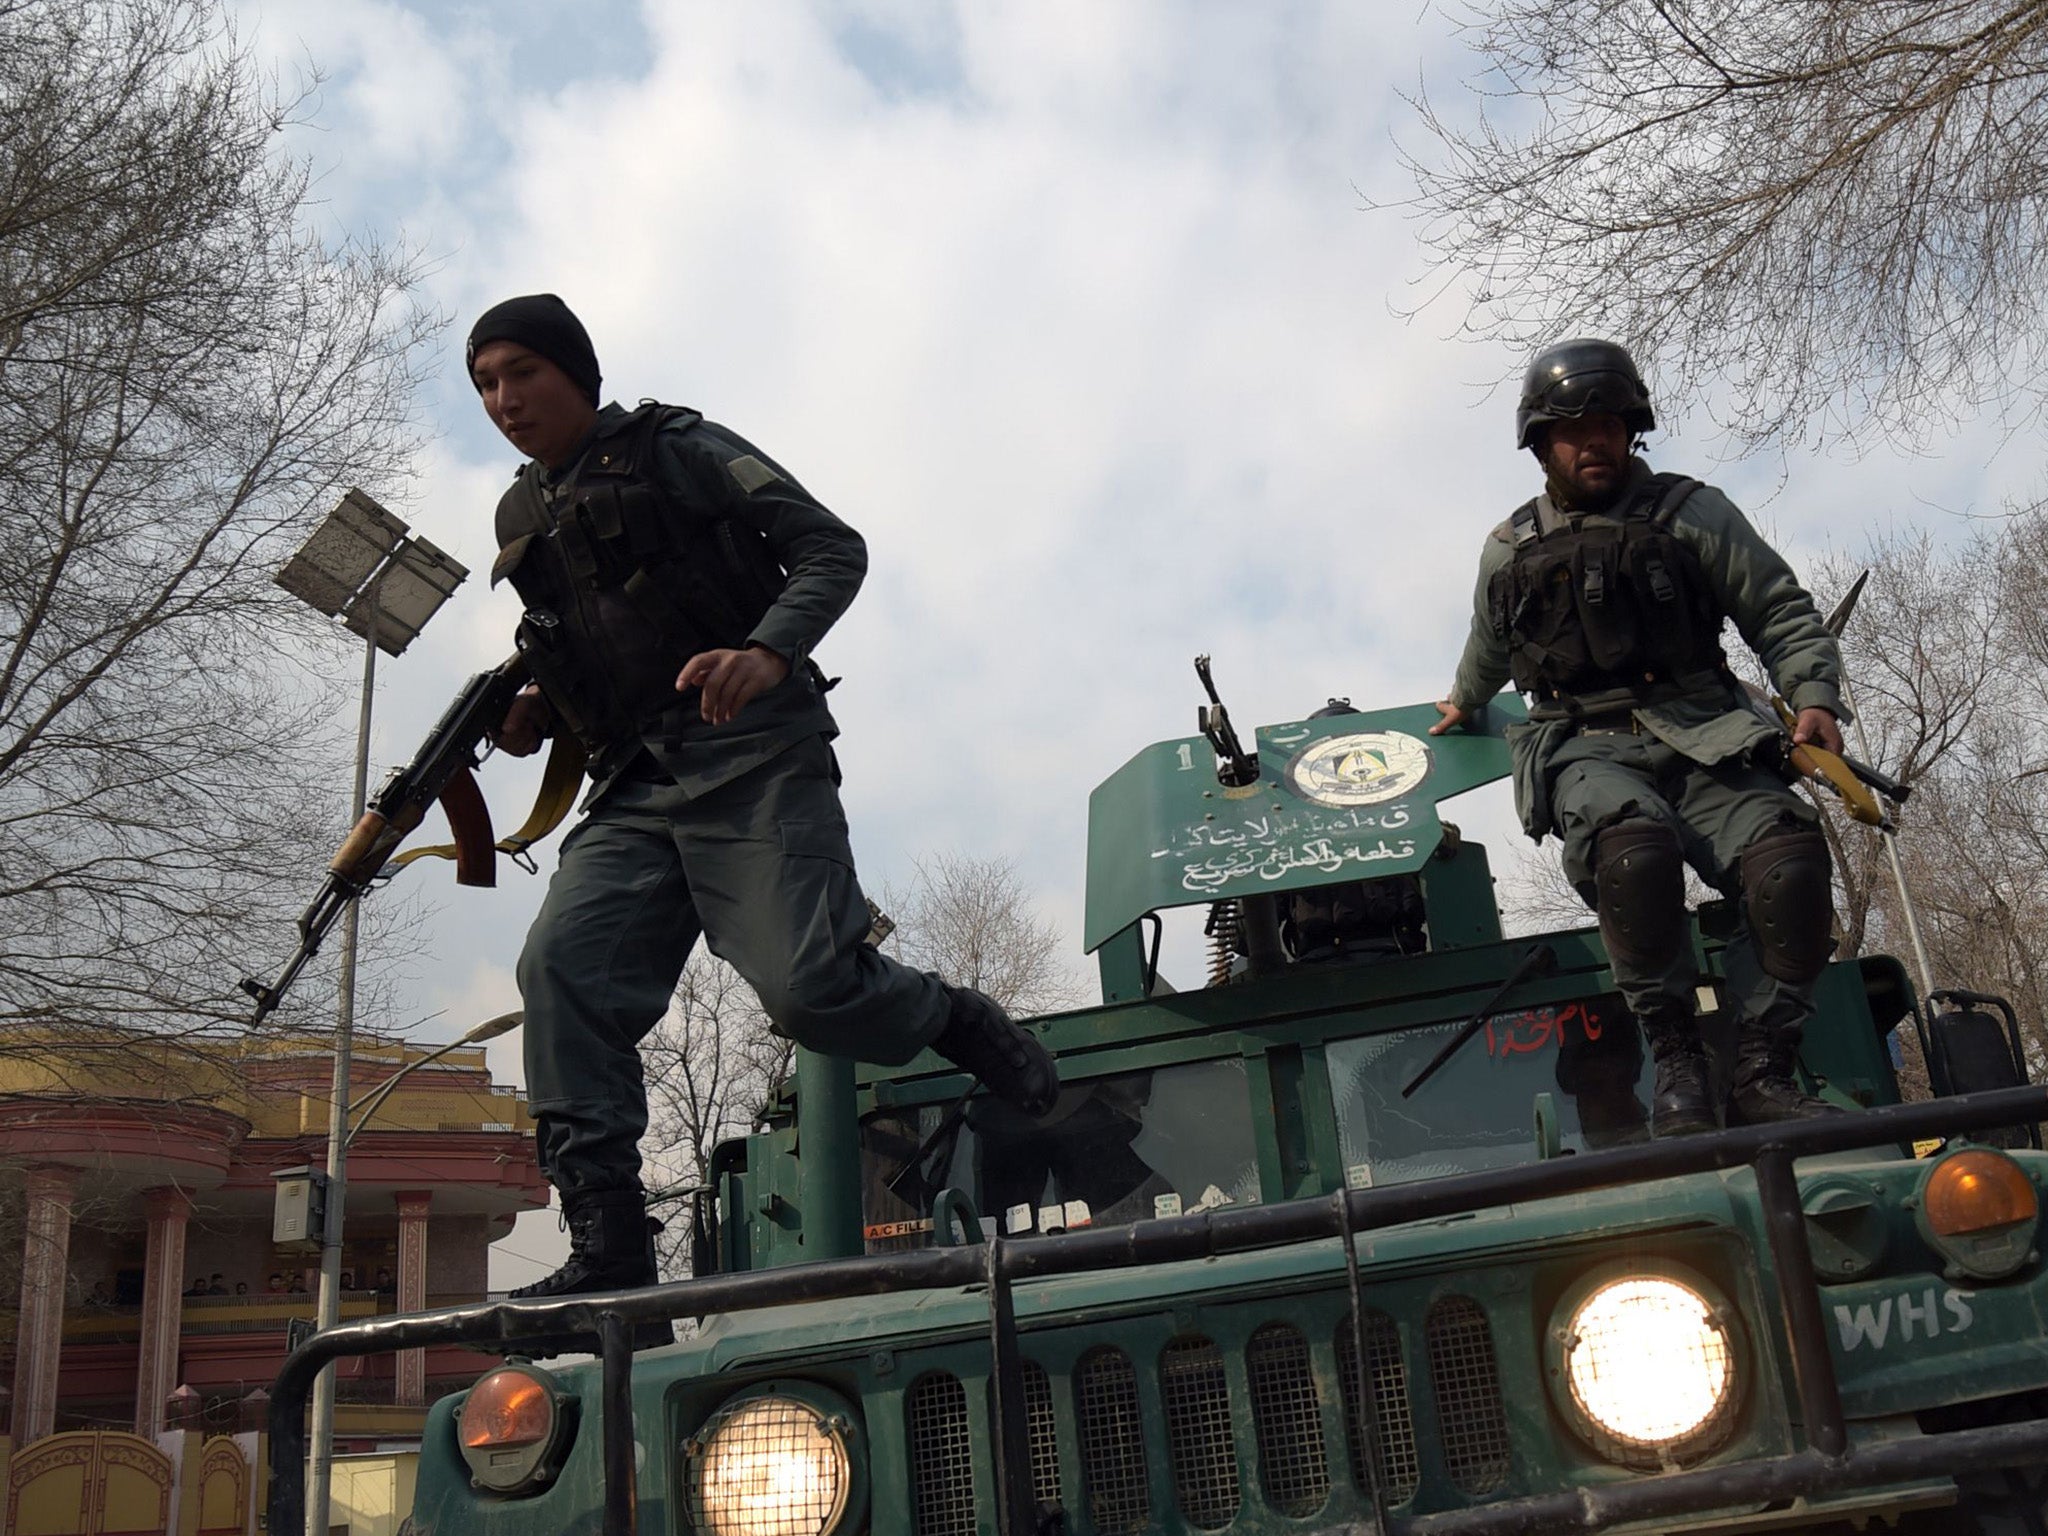 Afghan police officers leap into action after a military hospital attack on 8 March that left dozens dead